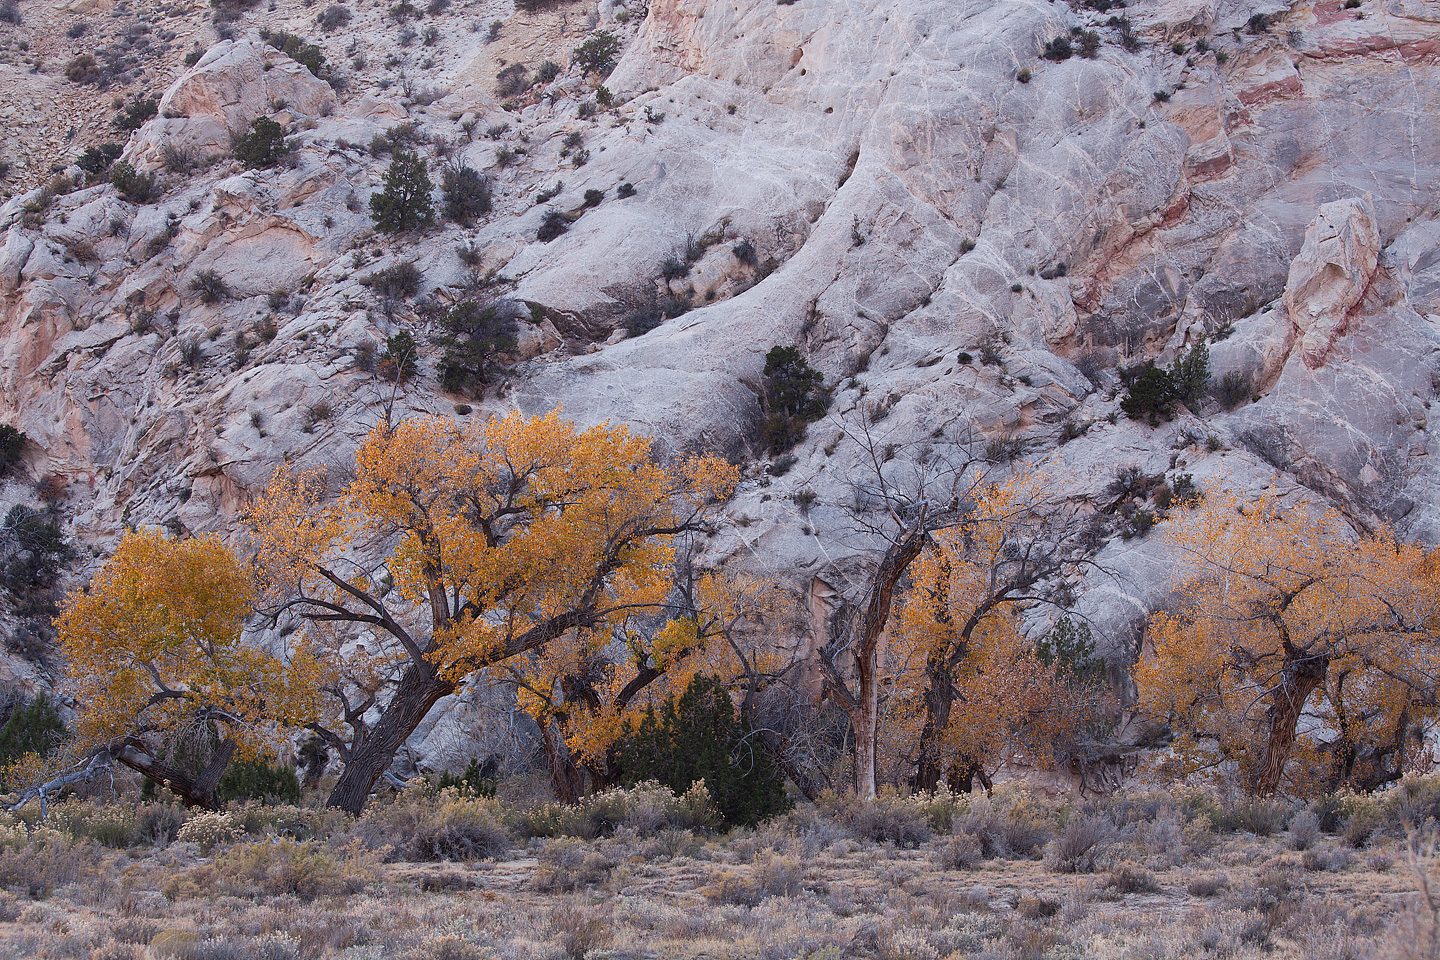 Autumn in Cottonwood Canyon - Grand Staircase-Escalante National Monument